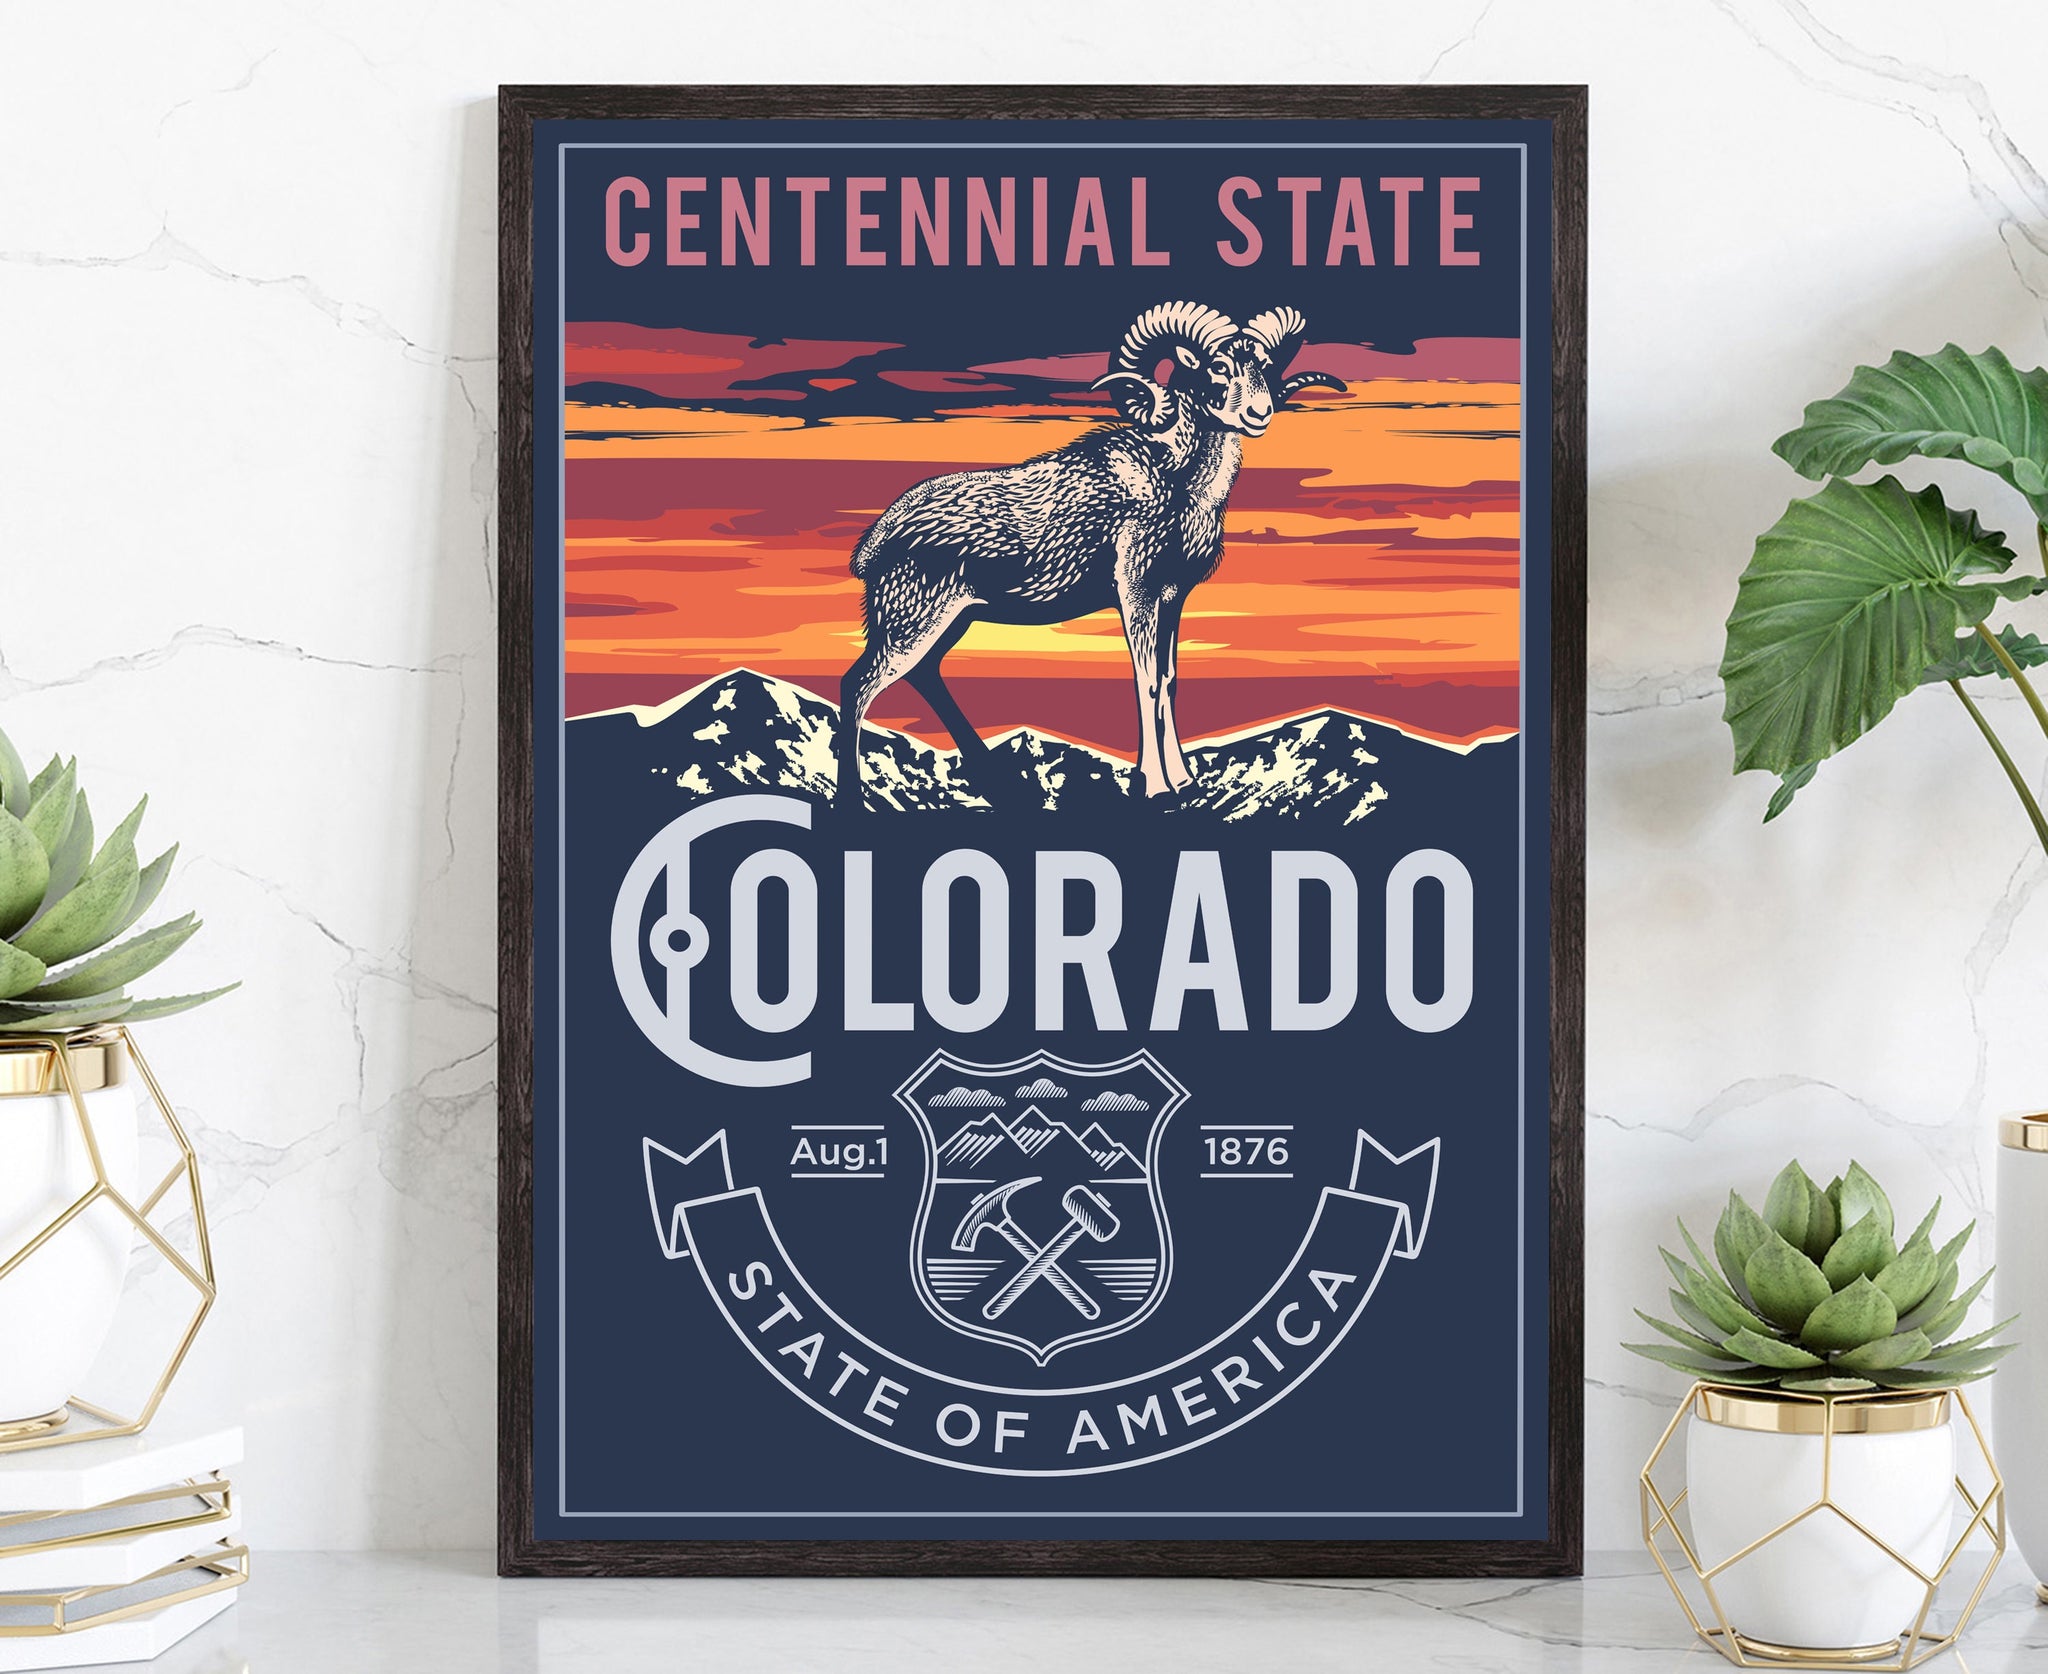 United States Colorado State Poster, Colorado Poster Print, Colorado State Emblem Poster, Retro Travel State Poster, Home, Office Wall Art